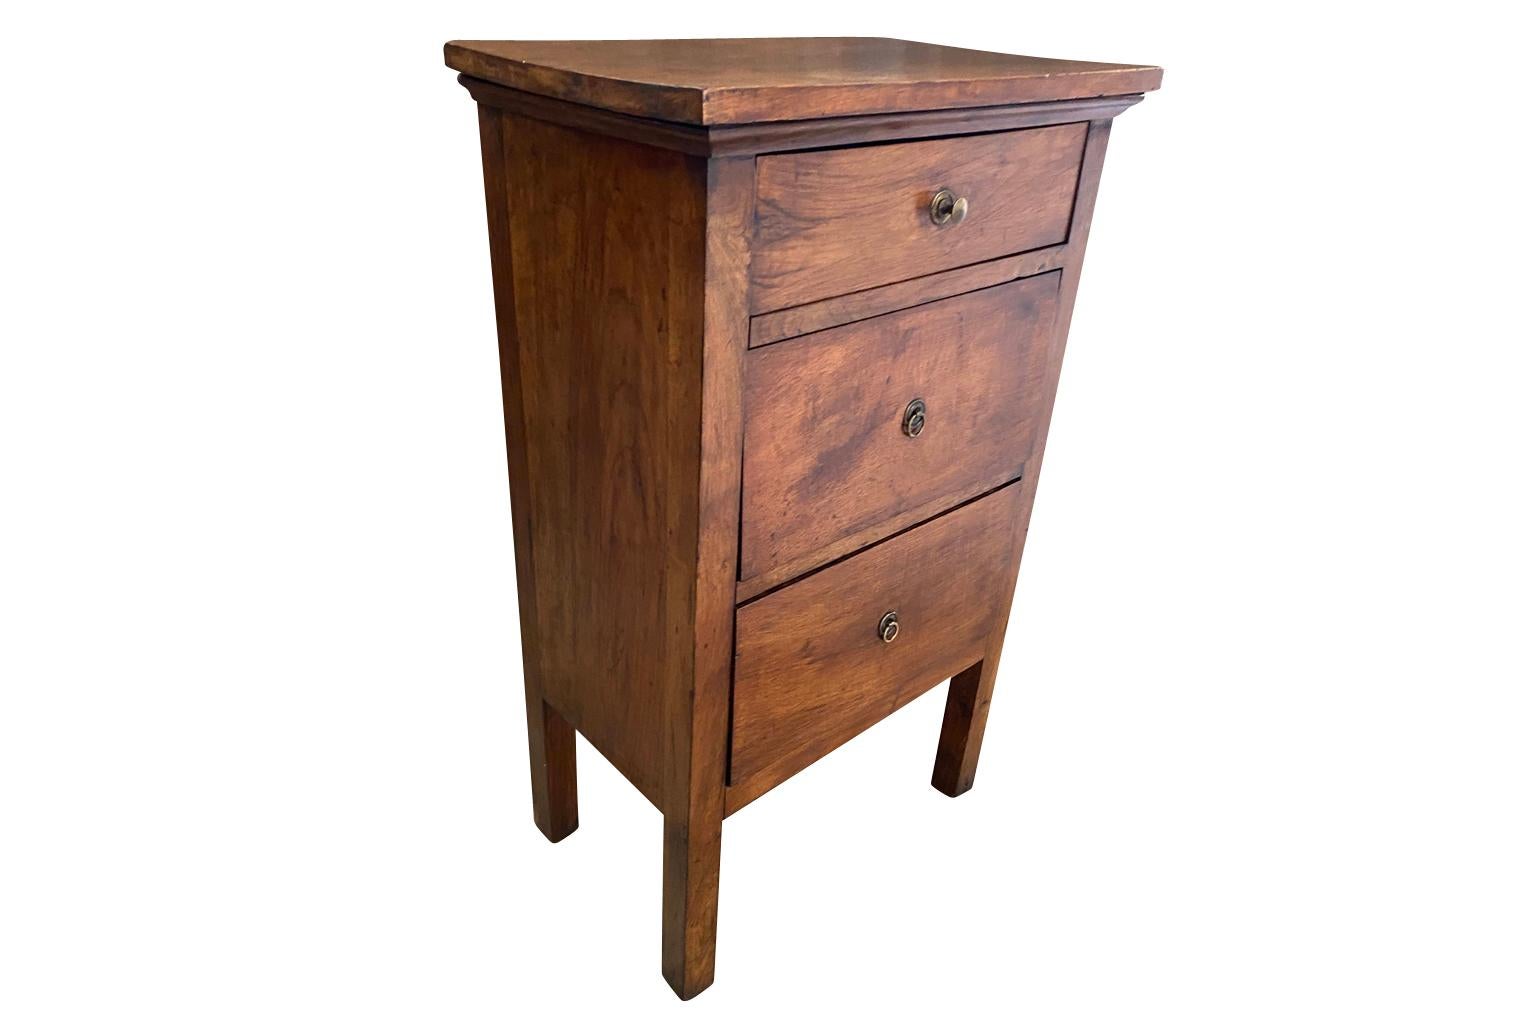 A charming later 19th century Commodini from the Lombardi region of Italy. Soundly constructed from walnut with three drawers.